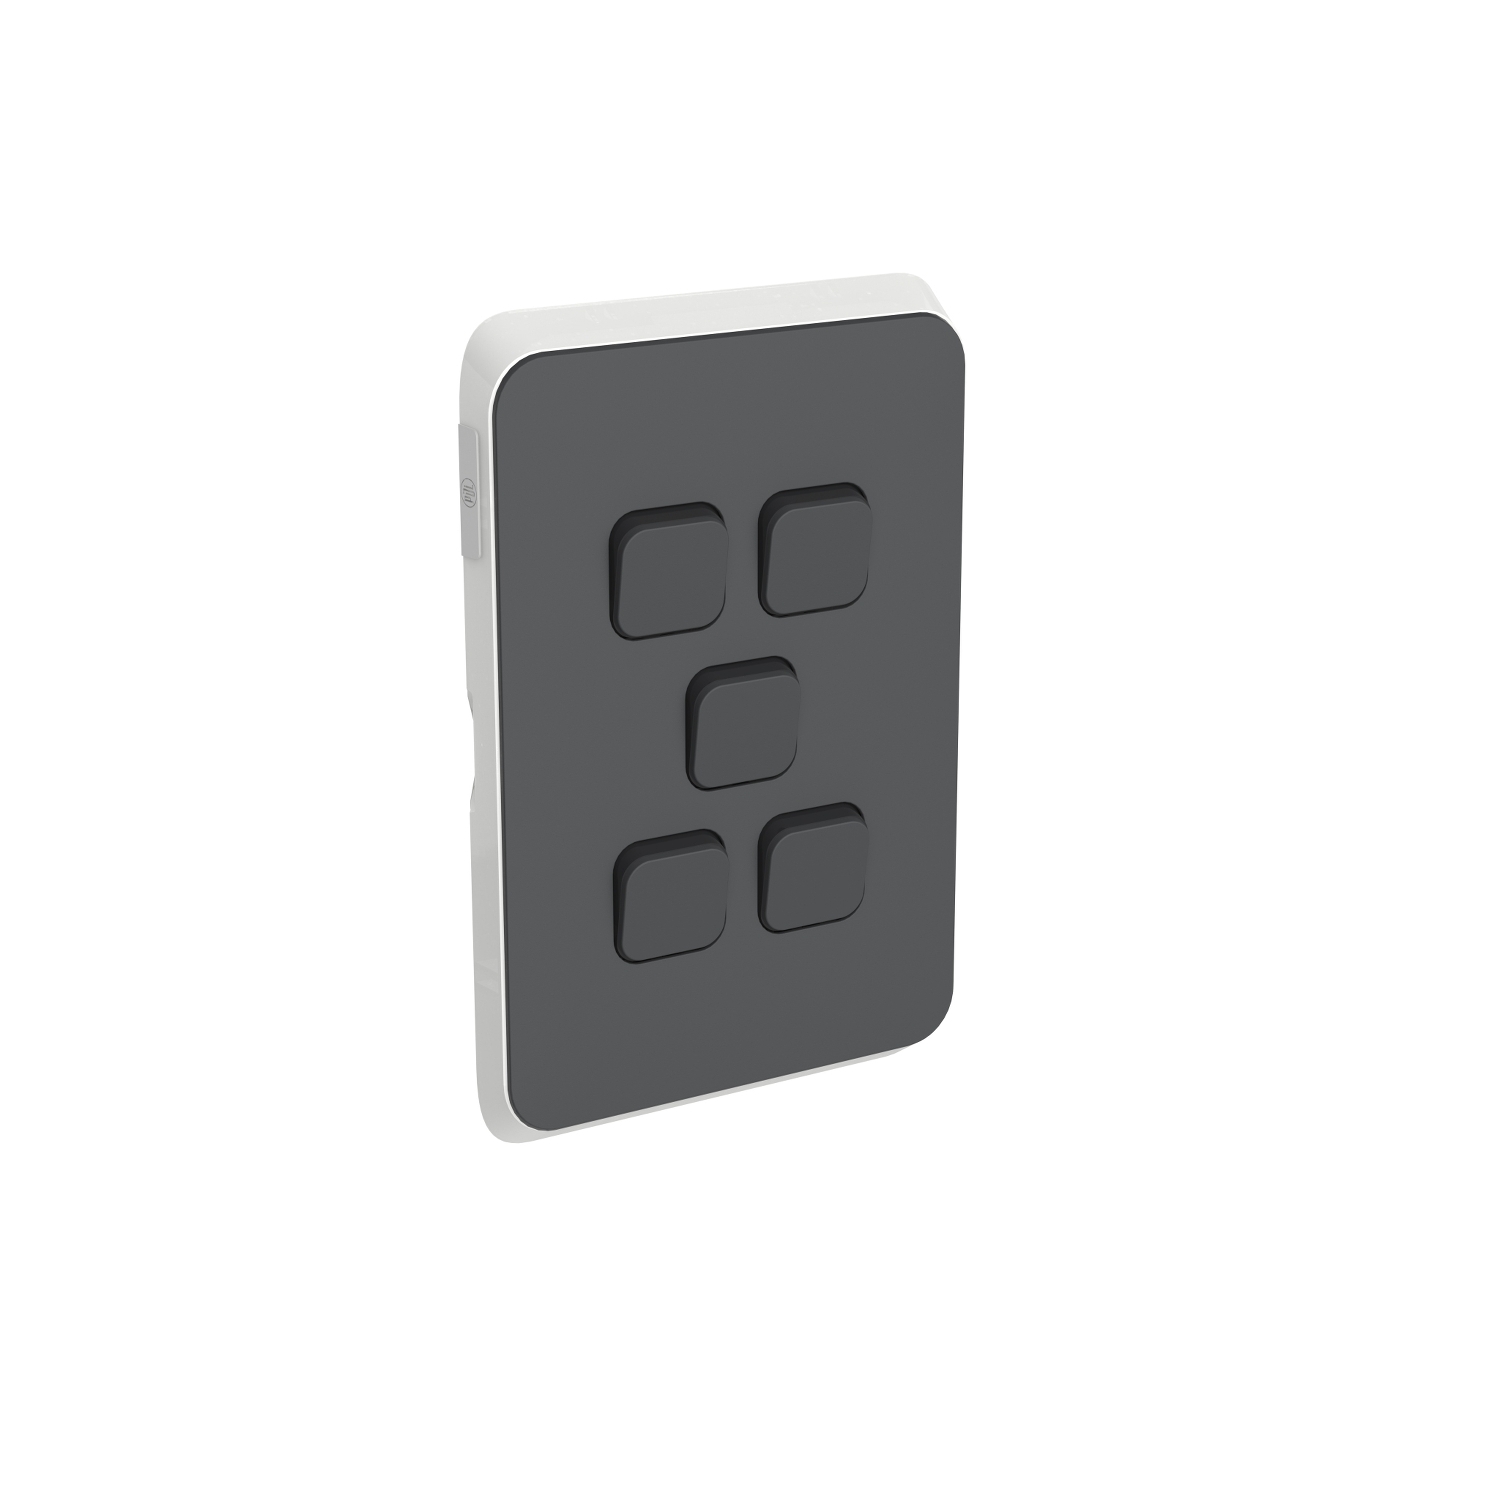 PDL385C-AN - PDL Iconic Cover Plate Switch 5Gang - Anthracite